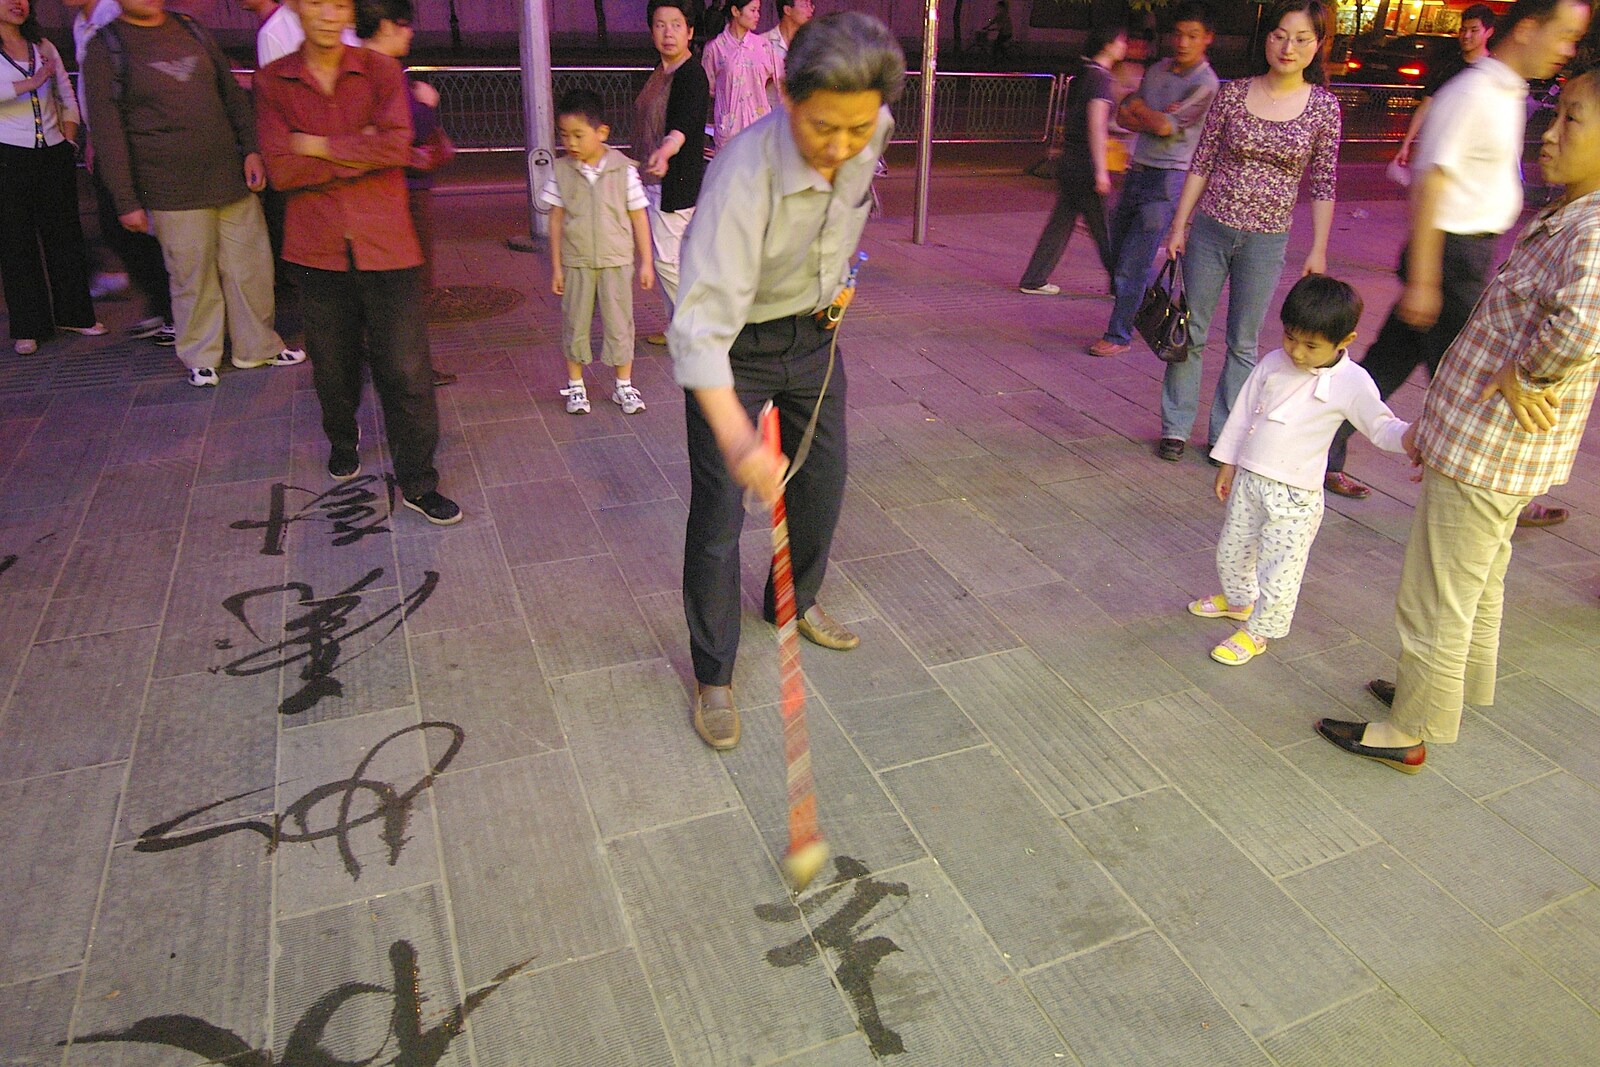 The crowd is fascinated by the calligrapher from Nanjing by Night, Nanjing, Jiangsu Province, China - 4th October 2006